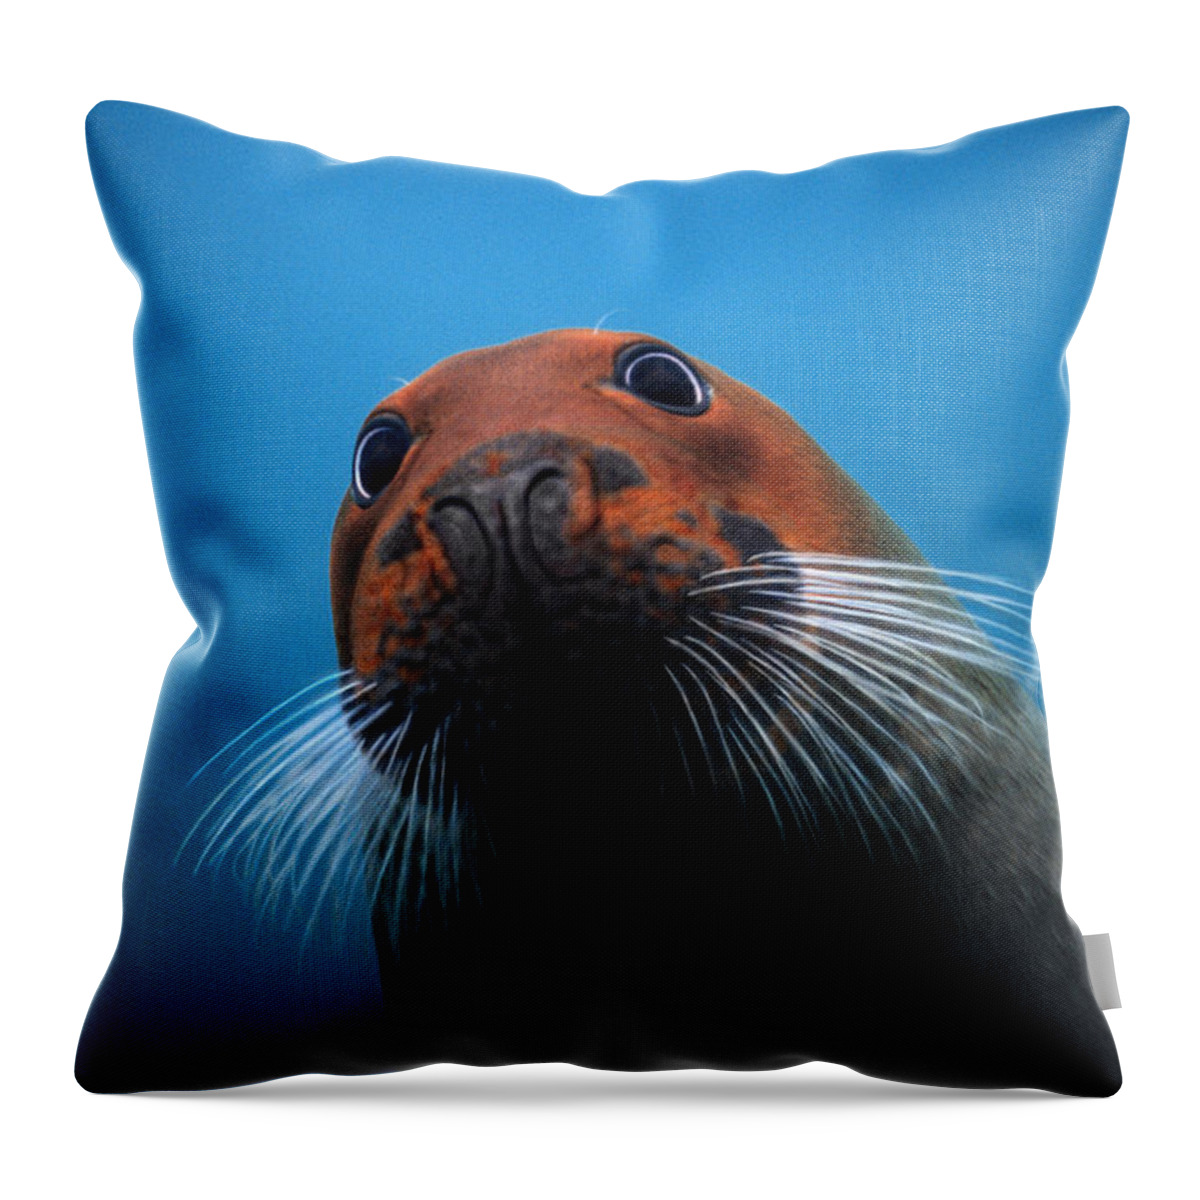 00123496 Throw Pillow featuring the photograph Bearded Seal With Head Stained Red by Flip Nicklin